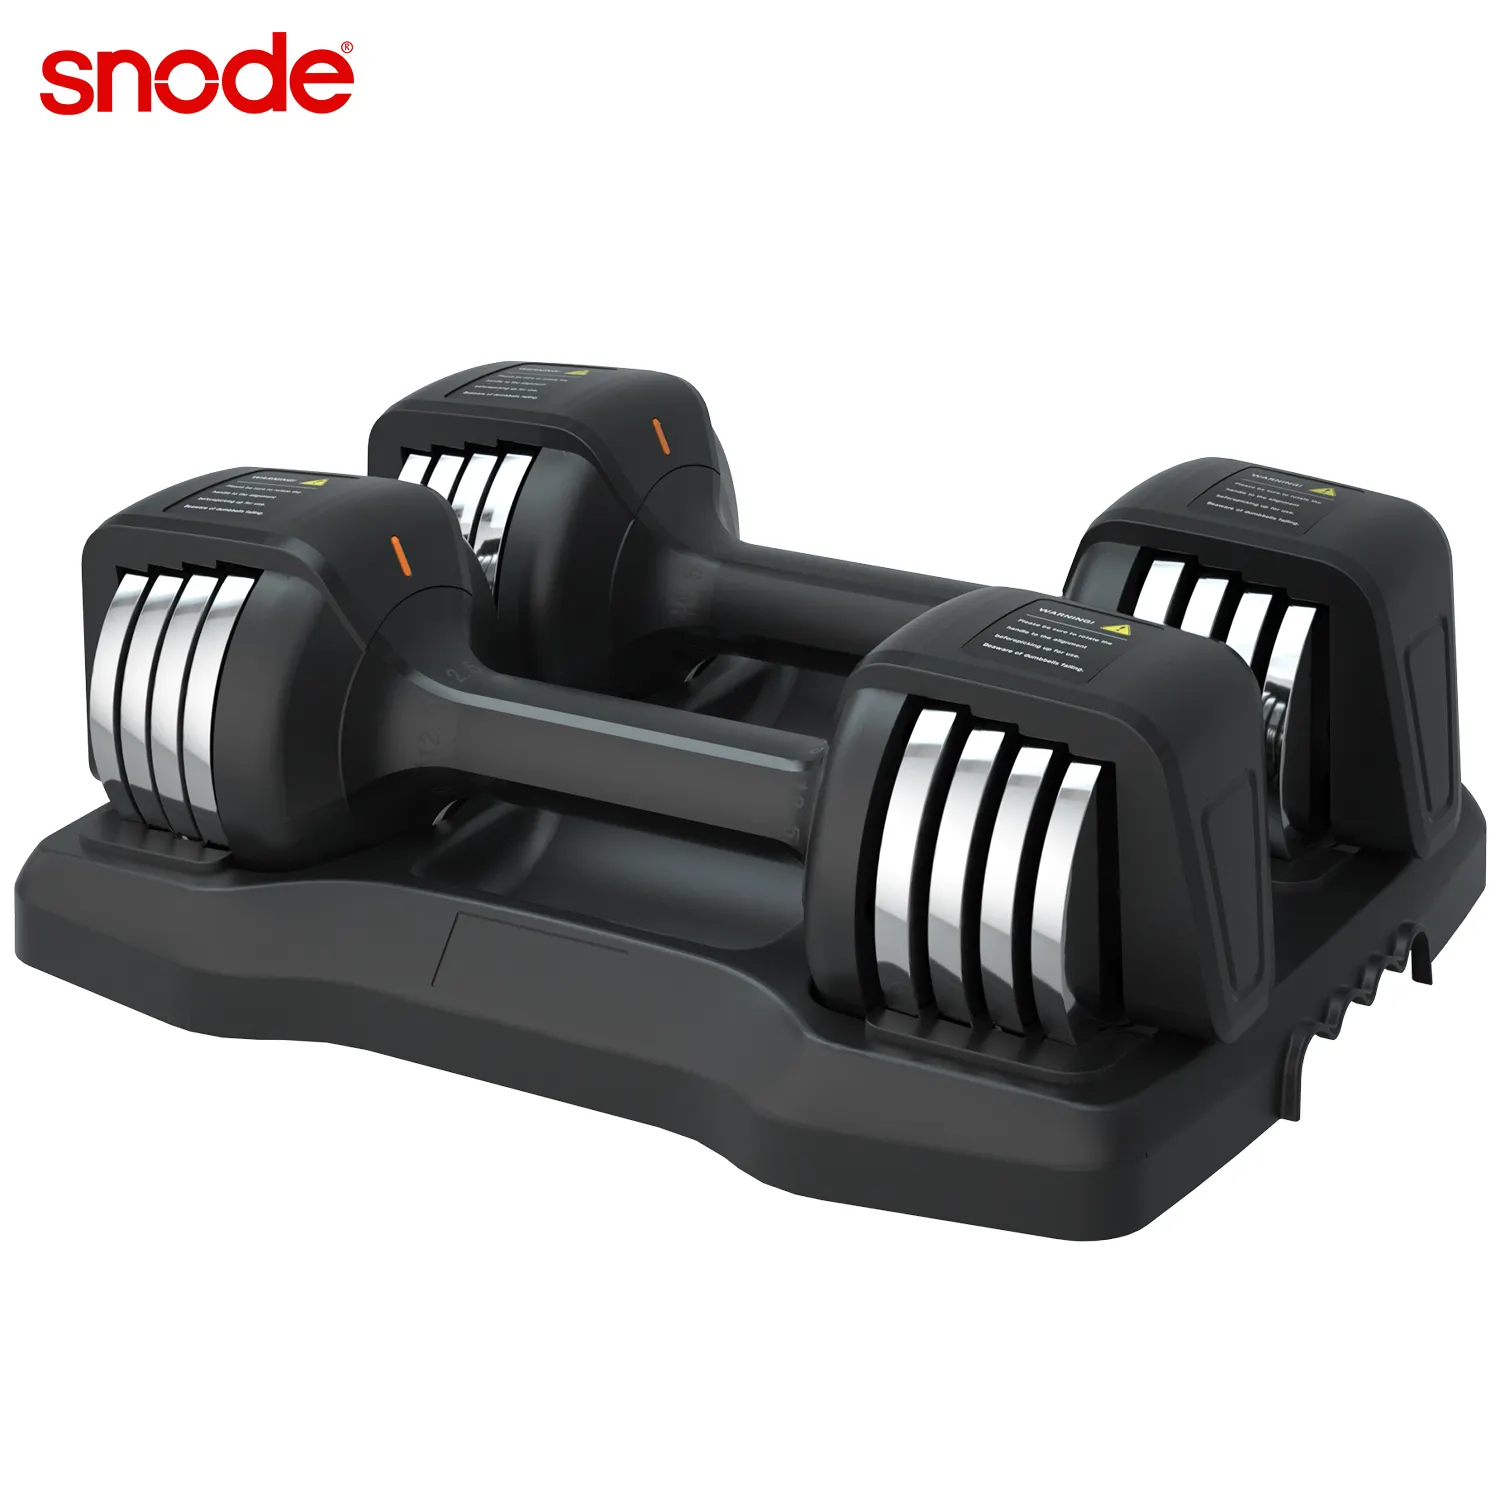 Snode Customizable Double Base Adjustable Small Weight Dumbbell New Release